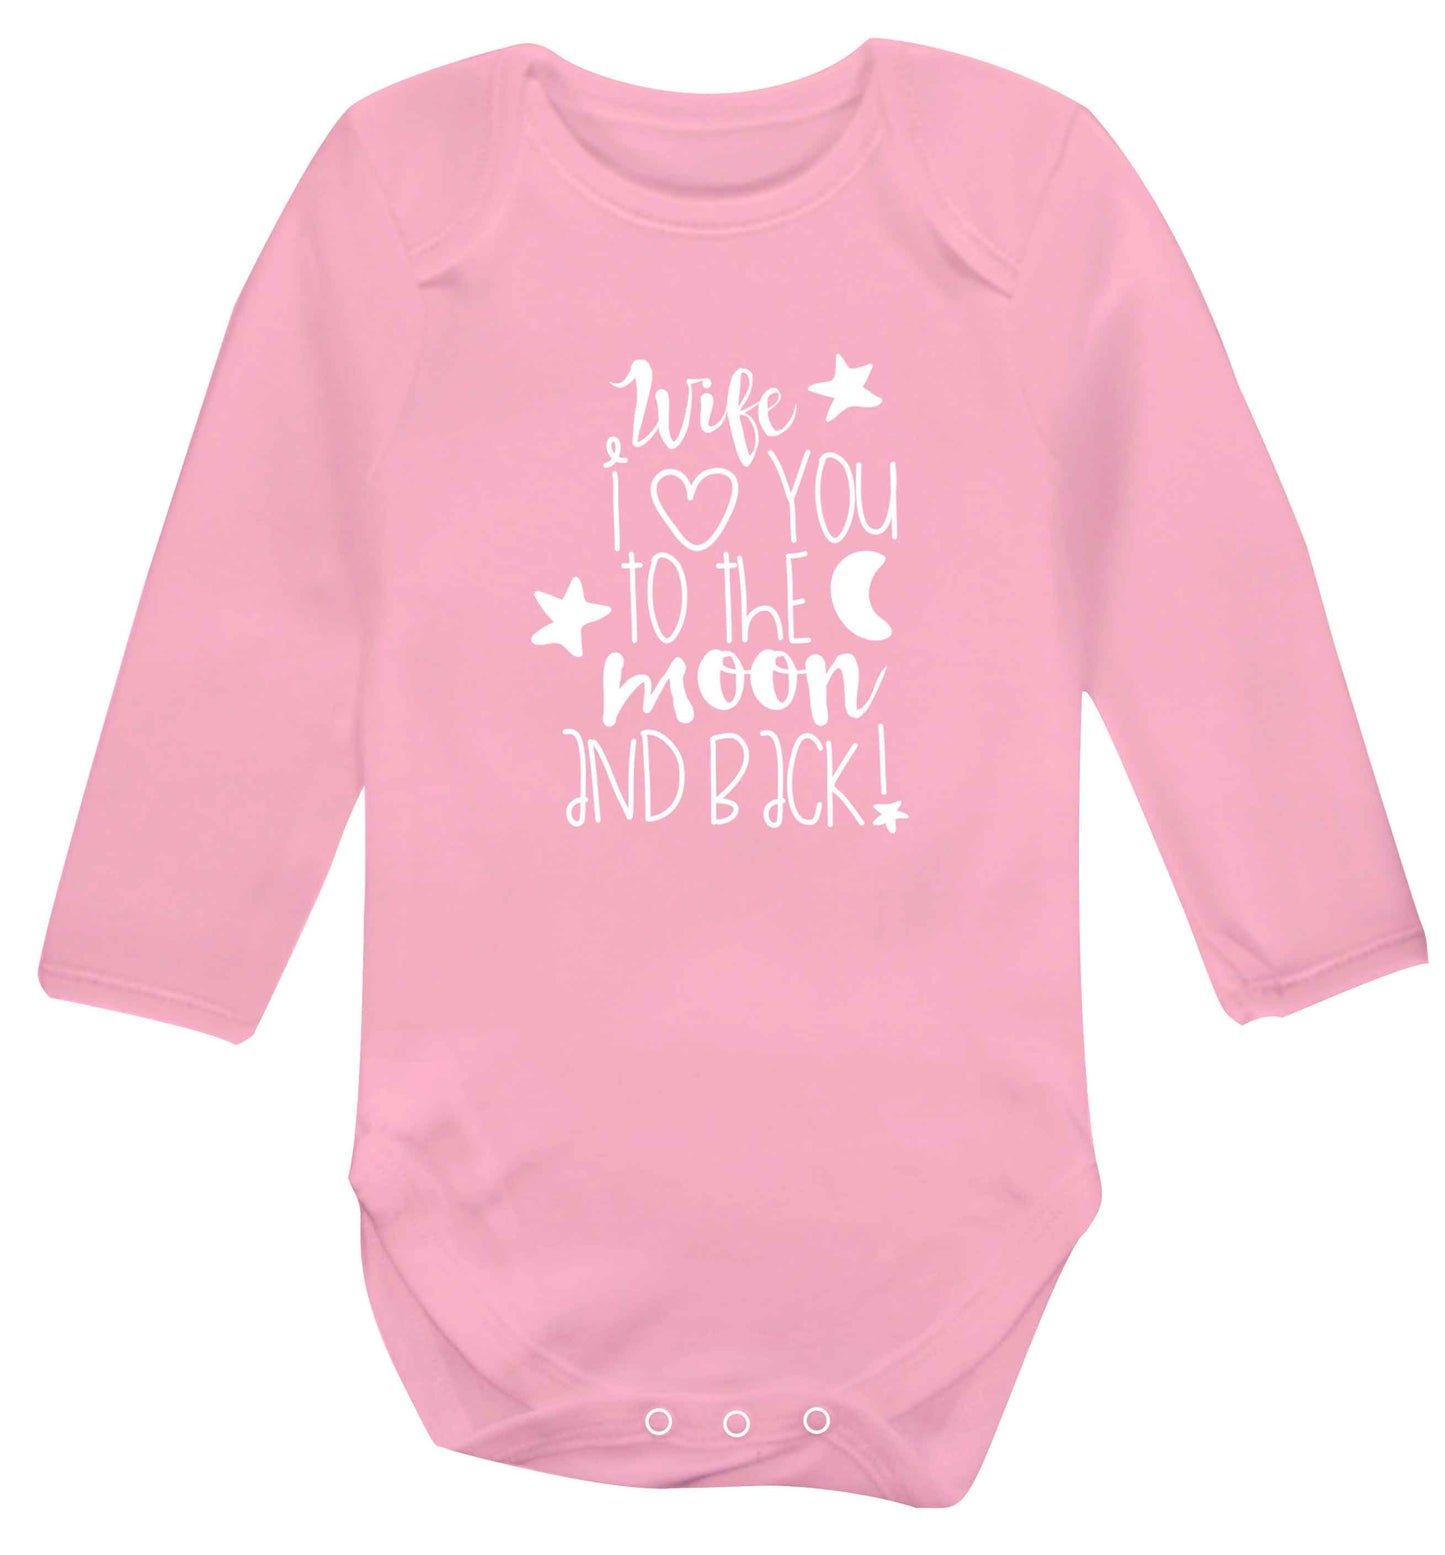 Wife I love you to the moon and back baby vest long sleeved pale pink 6-12 months